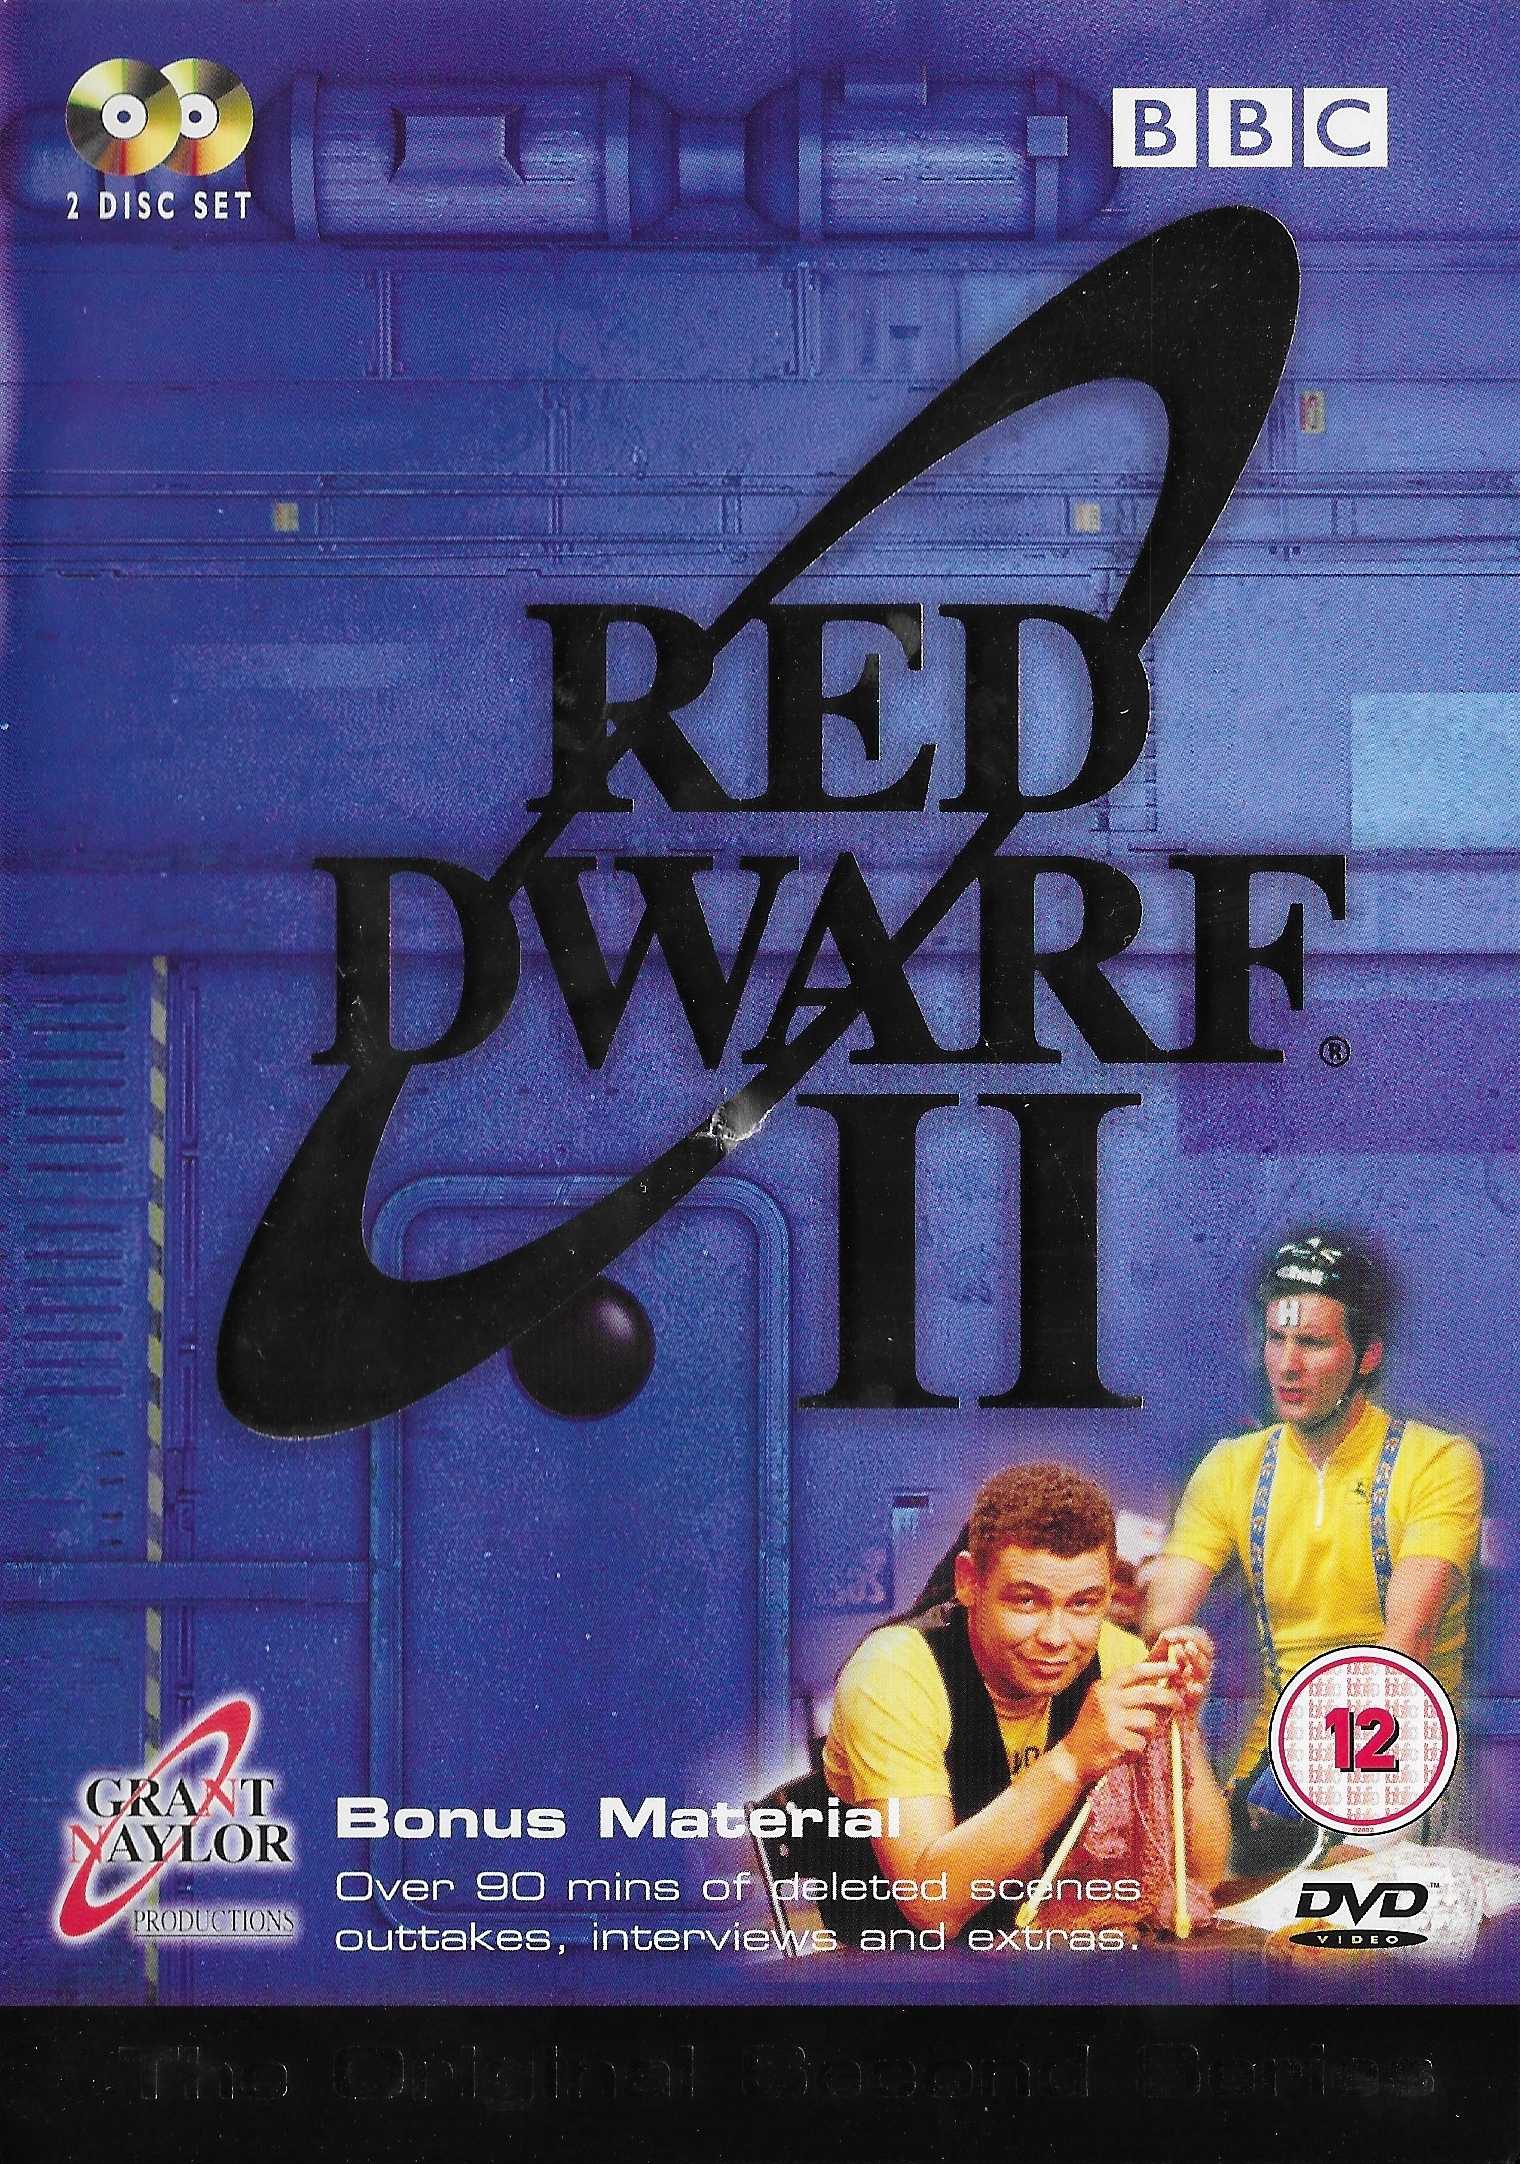 Front cover of BBCDVD 1118